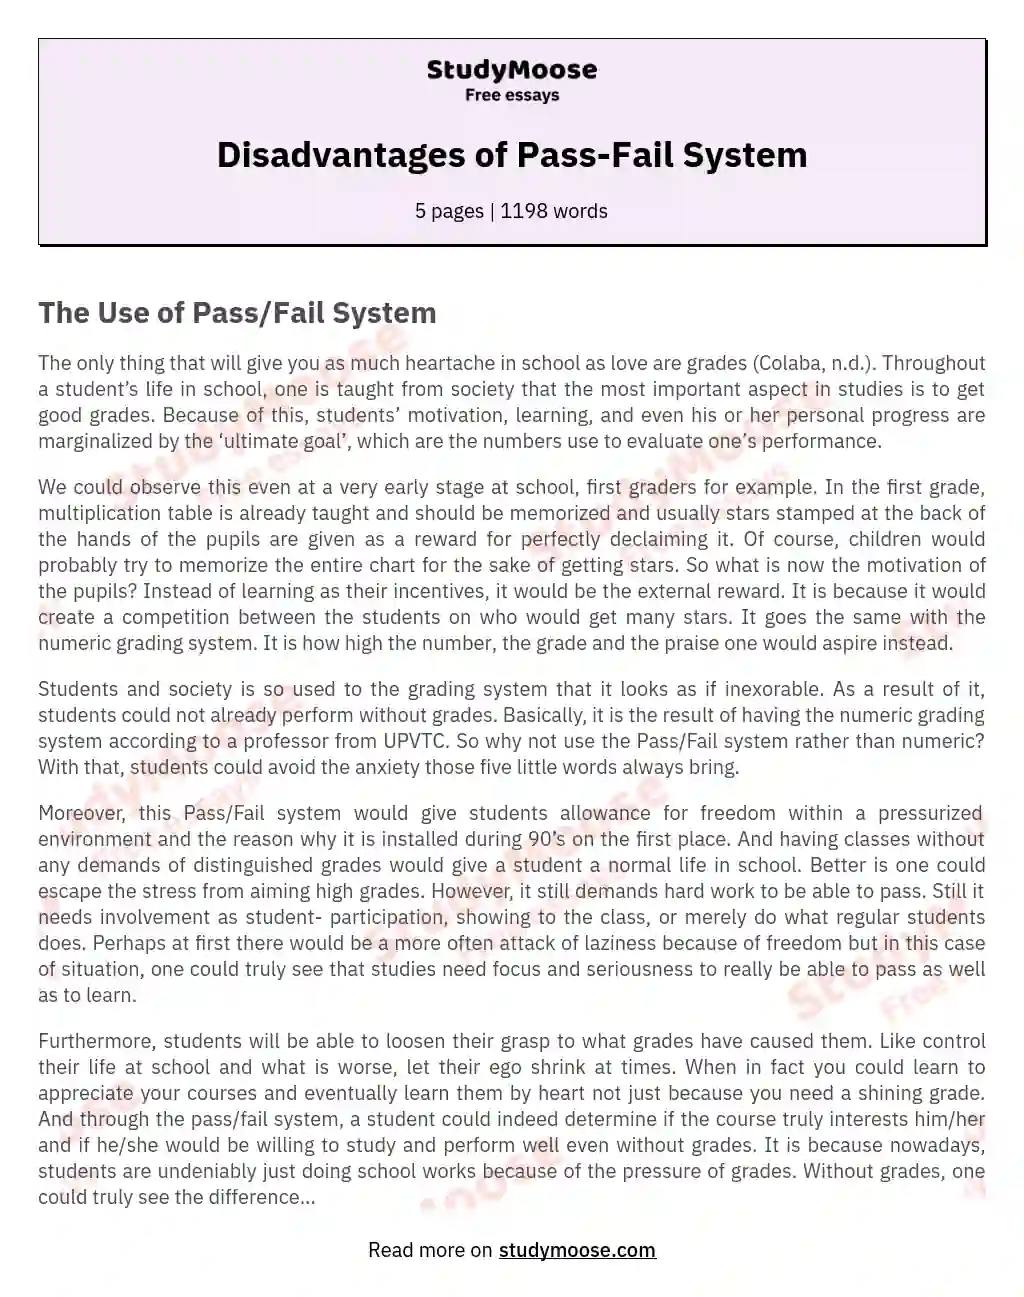 Disadvantages of Pass-Fail System